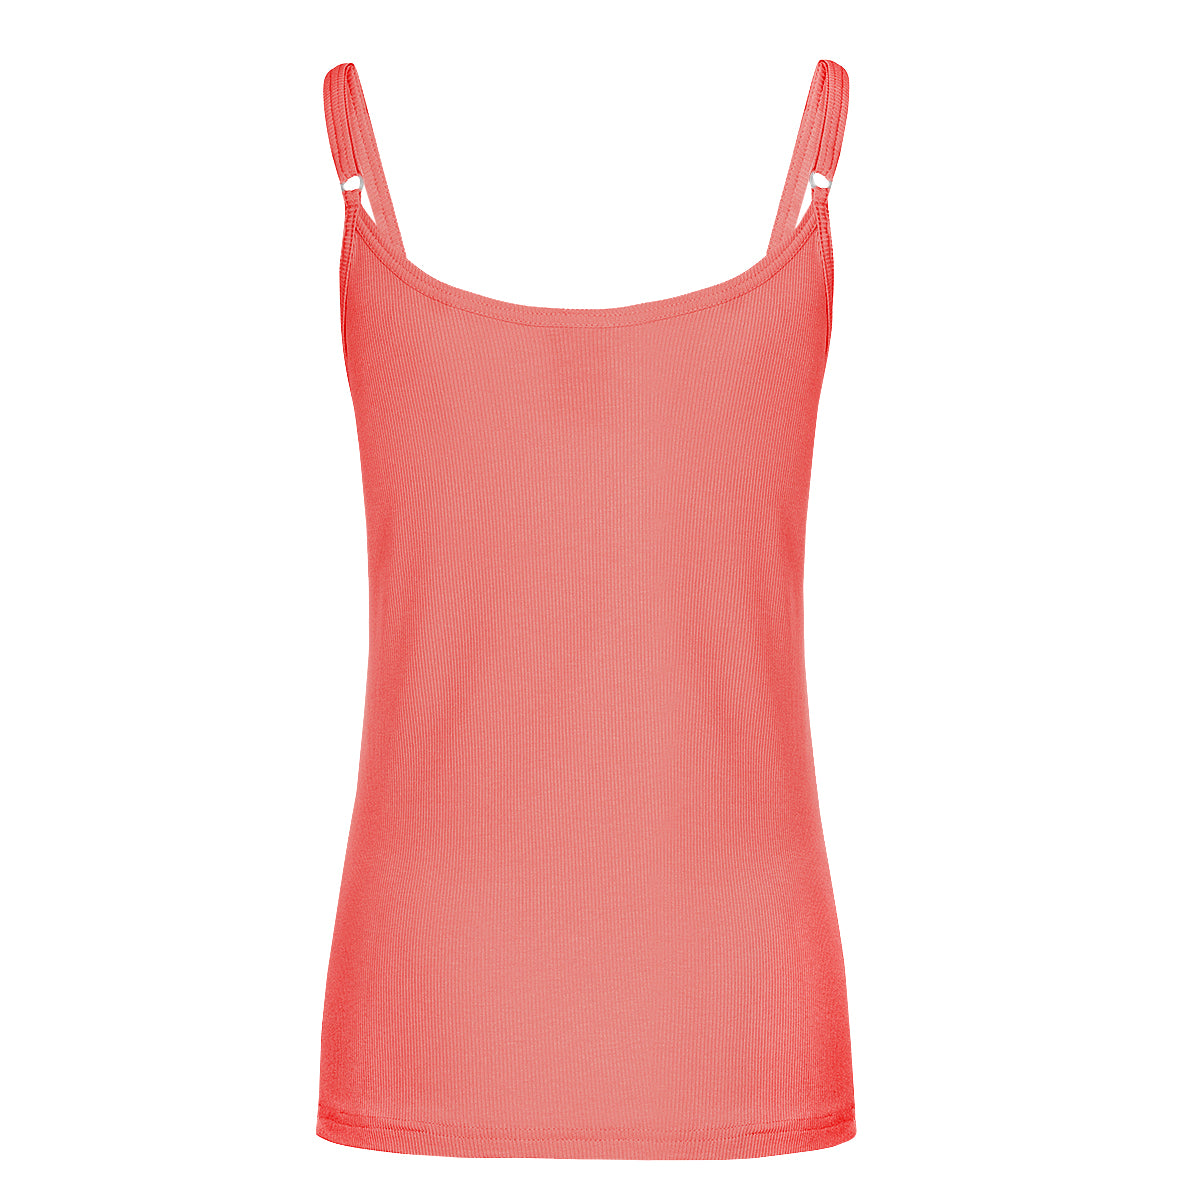 LUXZUZ // ONE TWO Adie Top Top 351 Coral